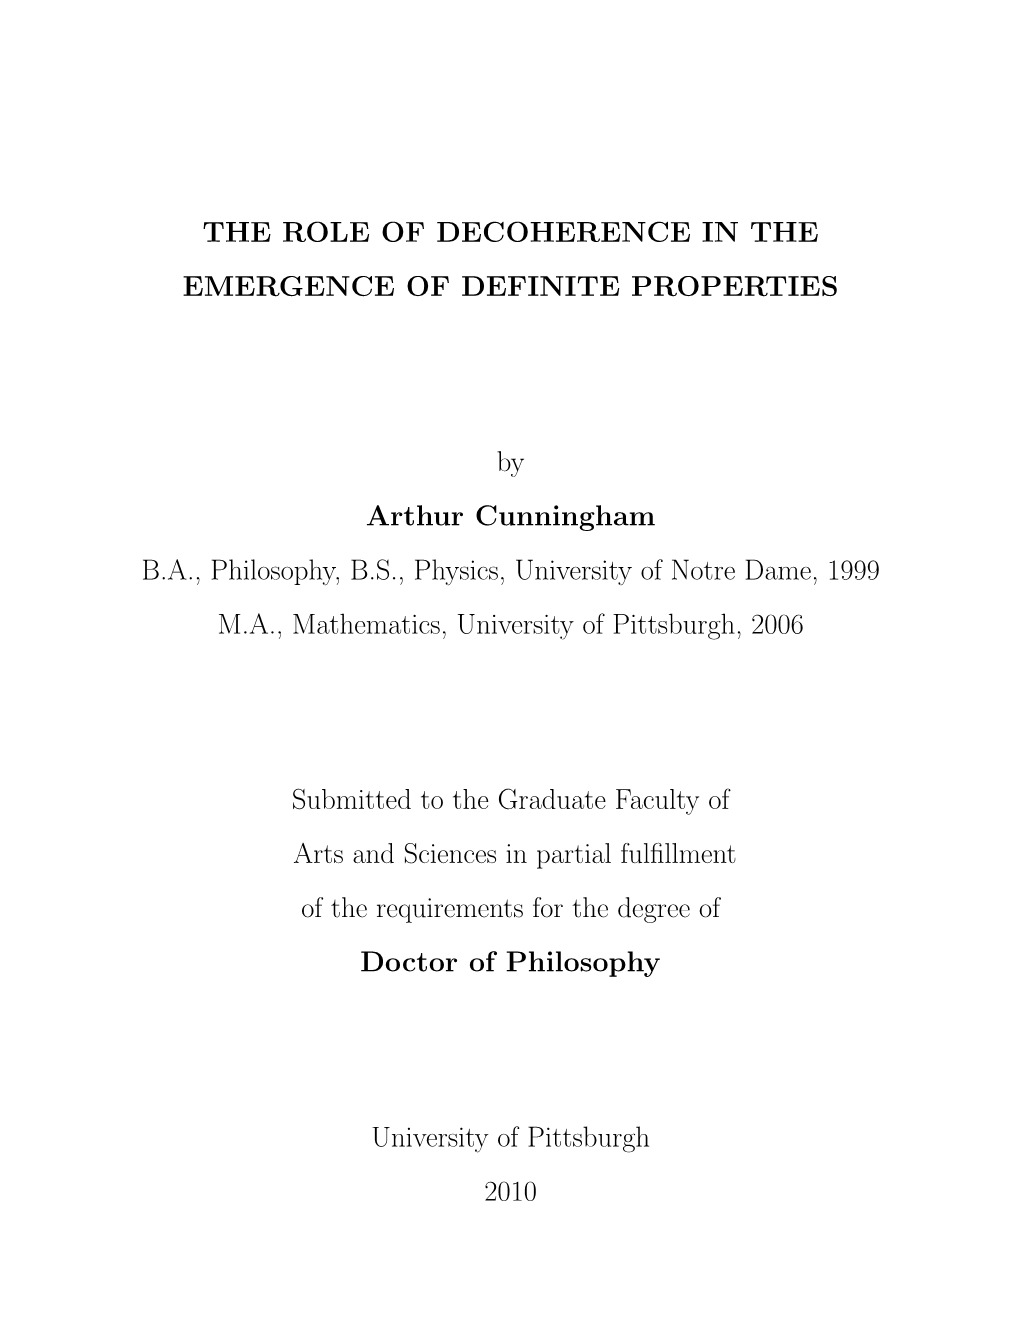 The Role of Decoherence in the Emergence of Definite Properties